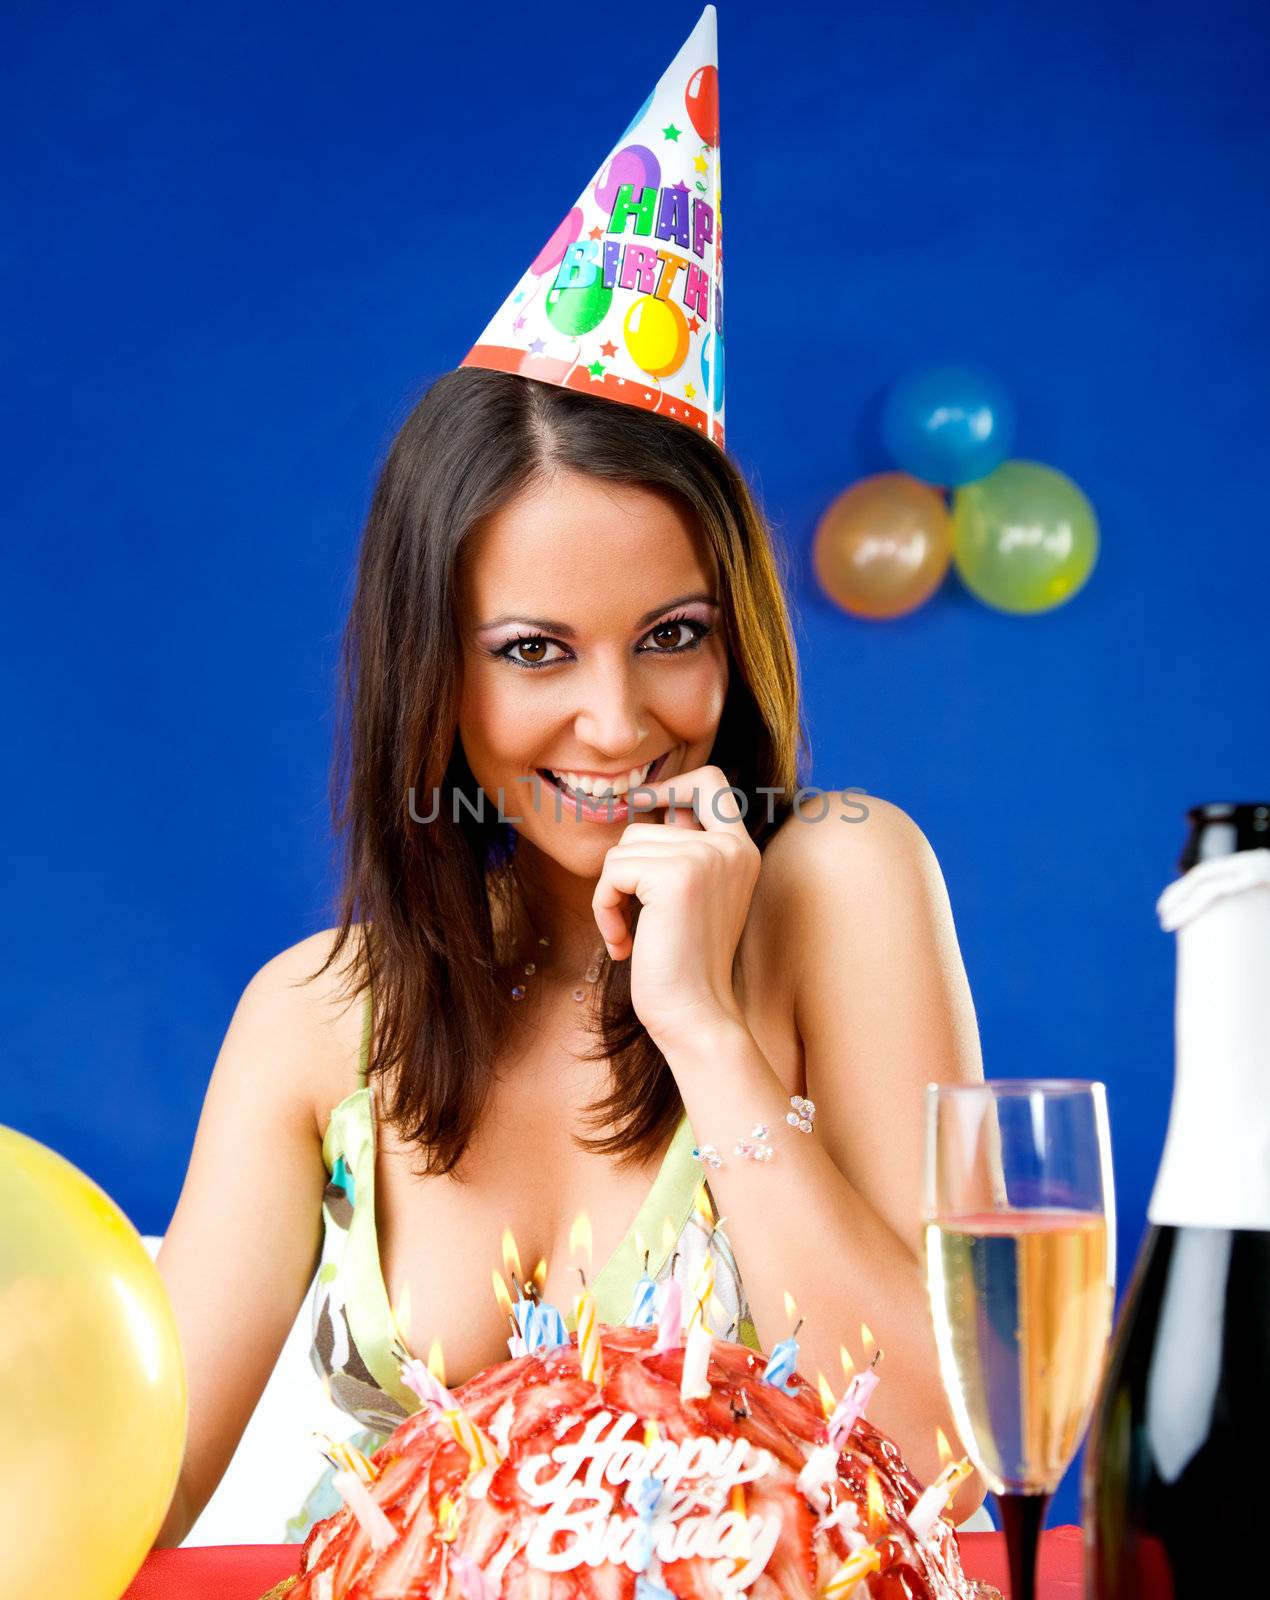 Beautiful happy female with party hat celebrating birthday over cake with candles